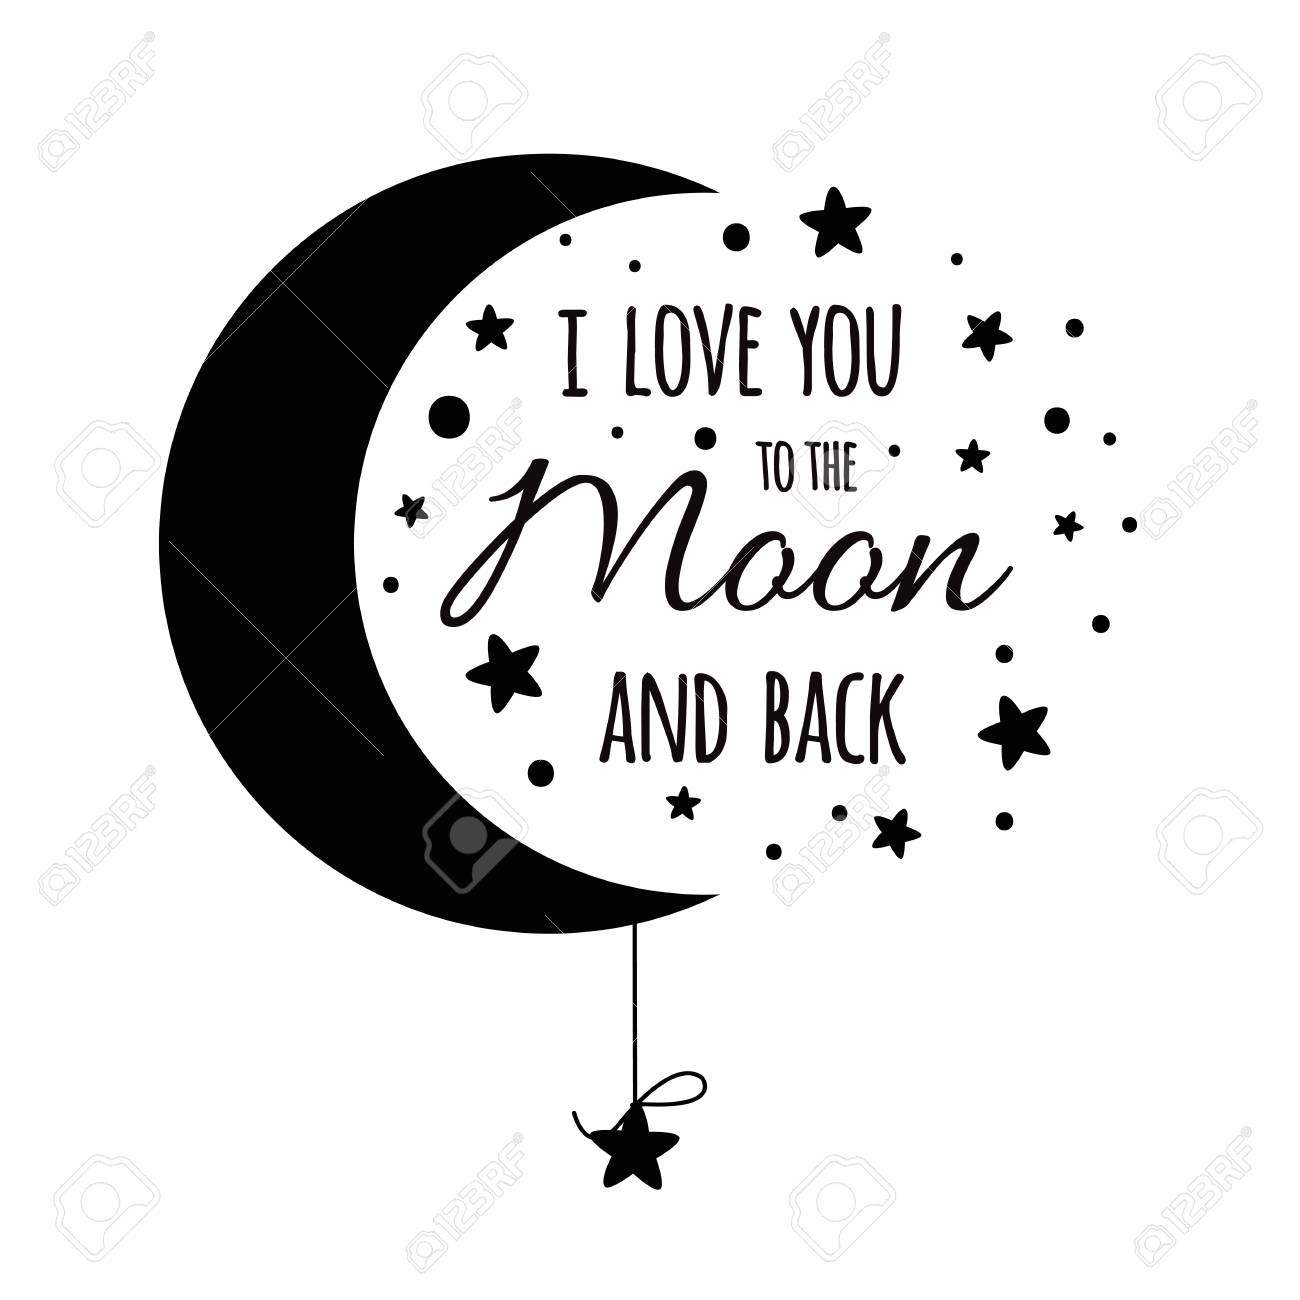 I love you to the moon and back. Handwritten inspirational phrase...